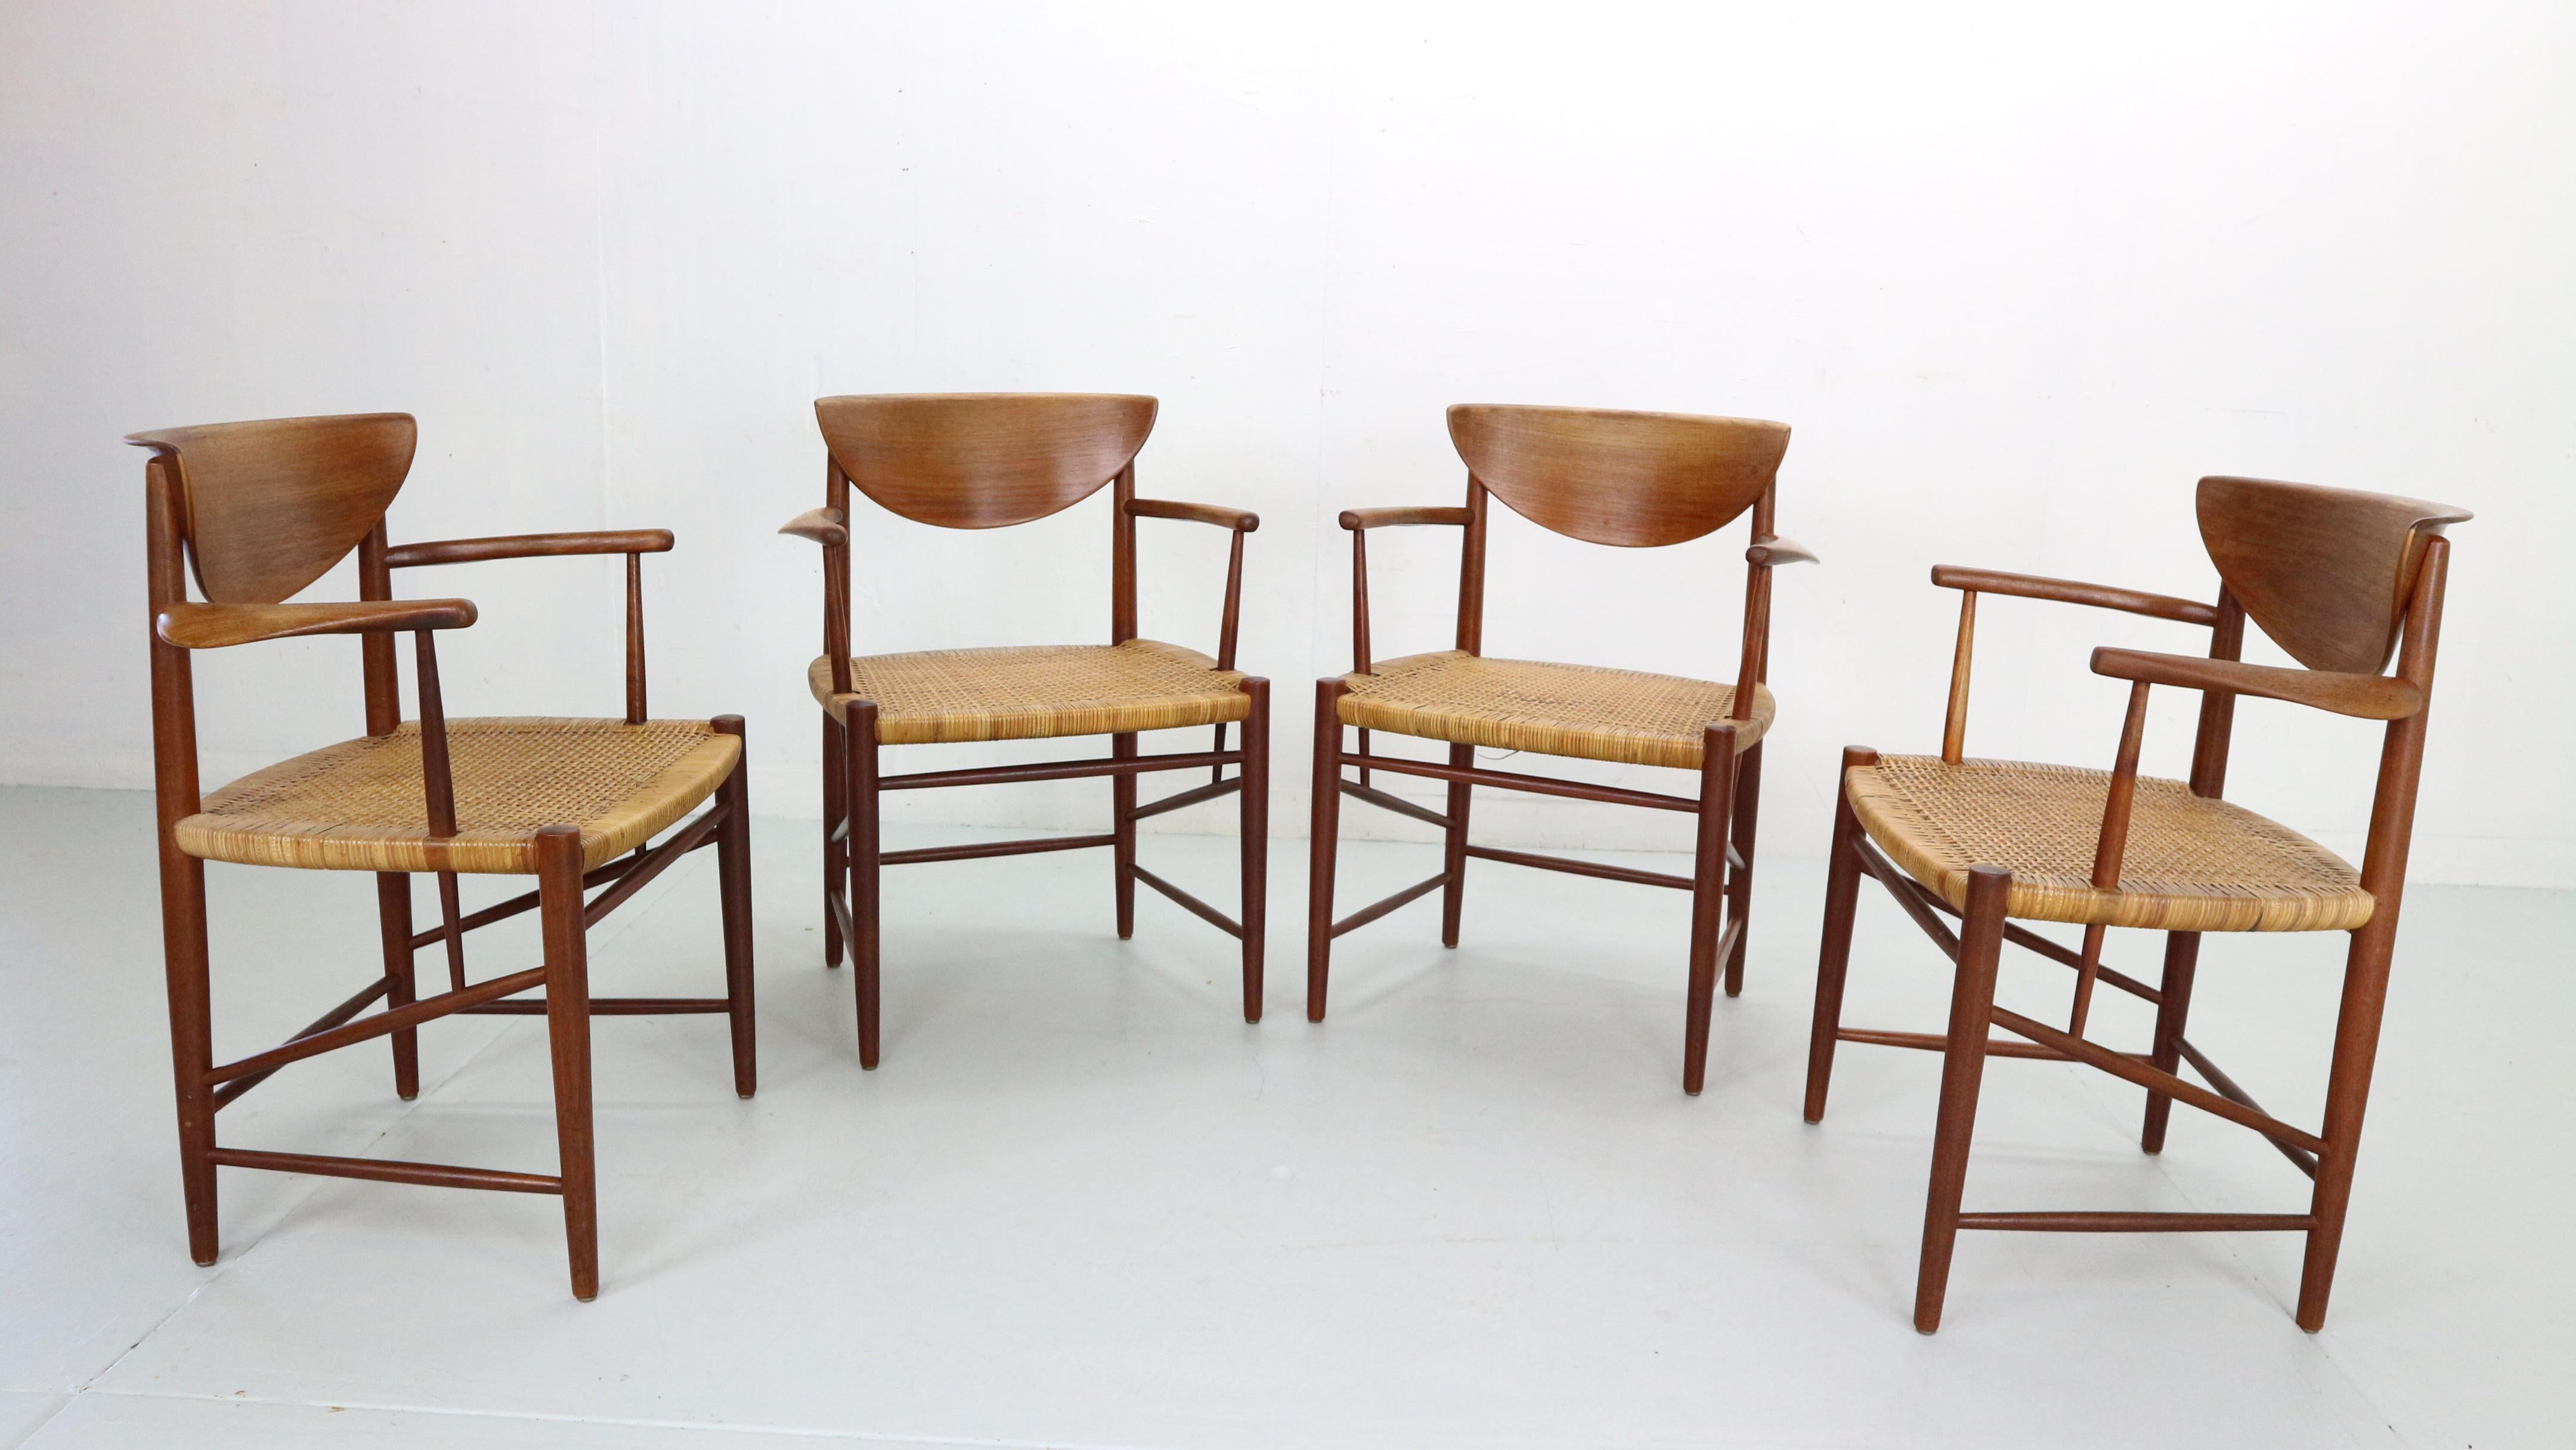 Scandinavian Modern period set of 4 armchairs or dinning room chairs designed by Peter Hvidt & Orla Mølgaard Nielsen and manufactured for Søborg Møbelfabrik in 1950's Denmark.

Chairs are made of solid teak beautifully curved frame, back rest and